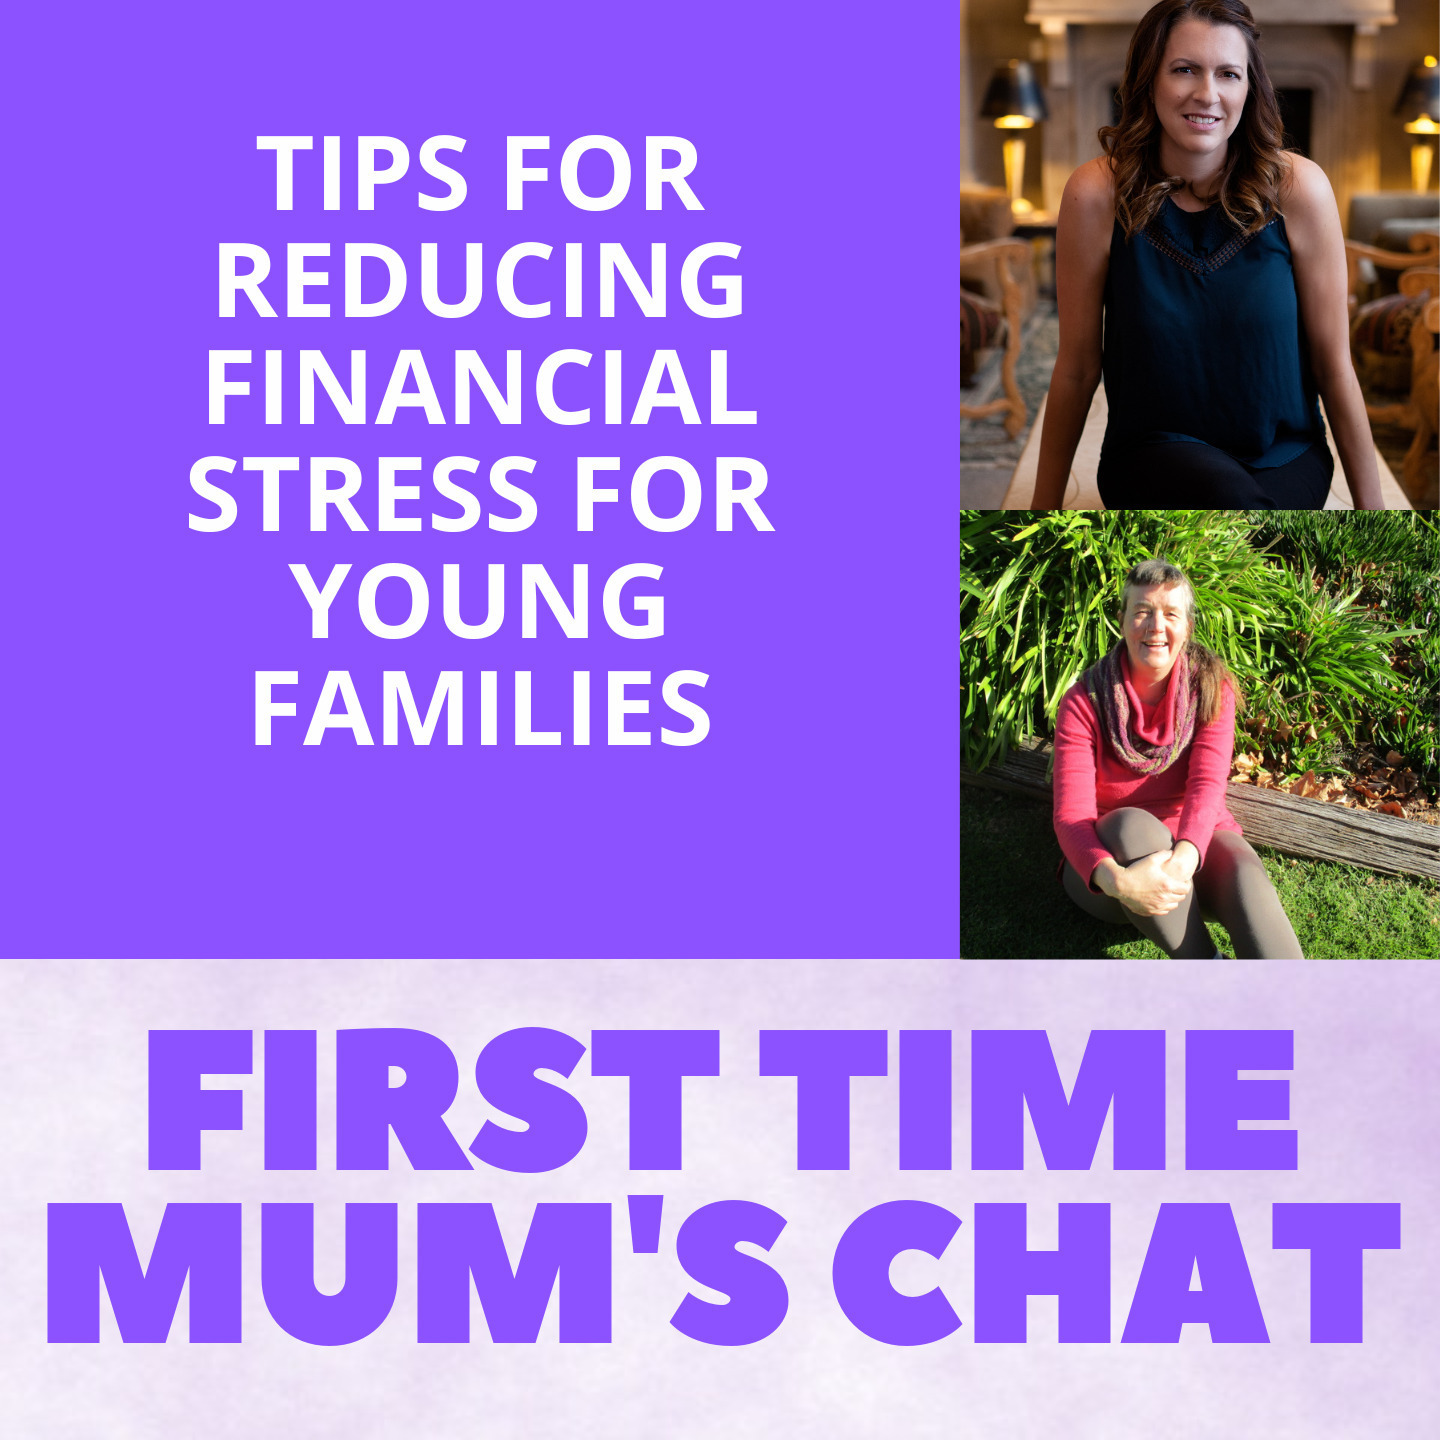 Tips For Reducing Financial Stress For Young Families